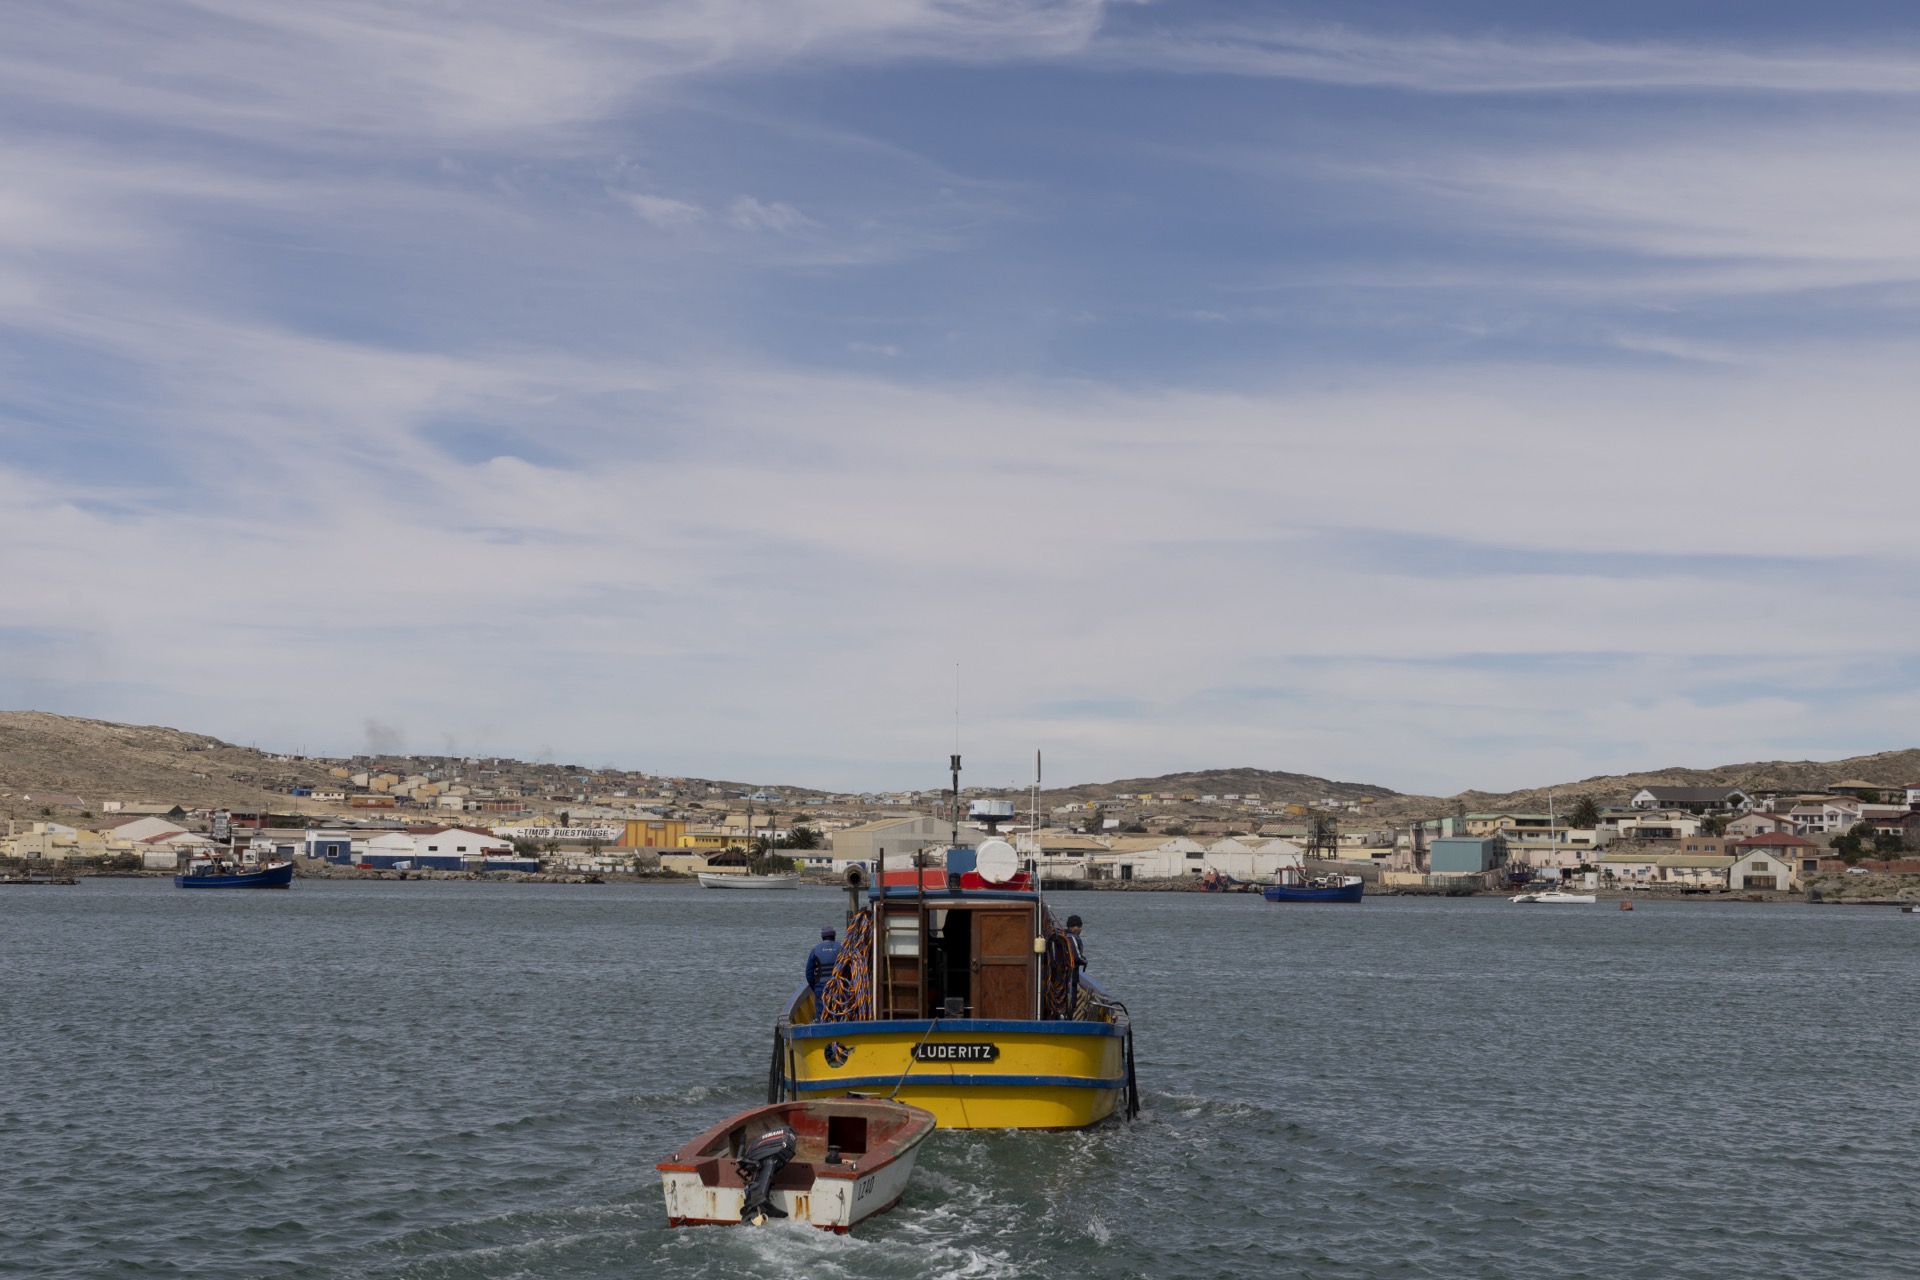 After working in the kelp farm the Kelp Blue crew returns to the port in Lüderitz, Namibia, August 17, 2023. Adriane Ohanesian for the Bulletin of the Atomic Scientists